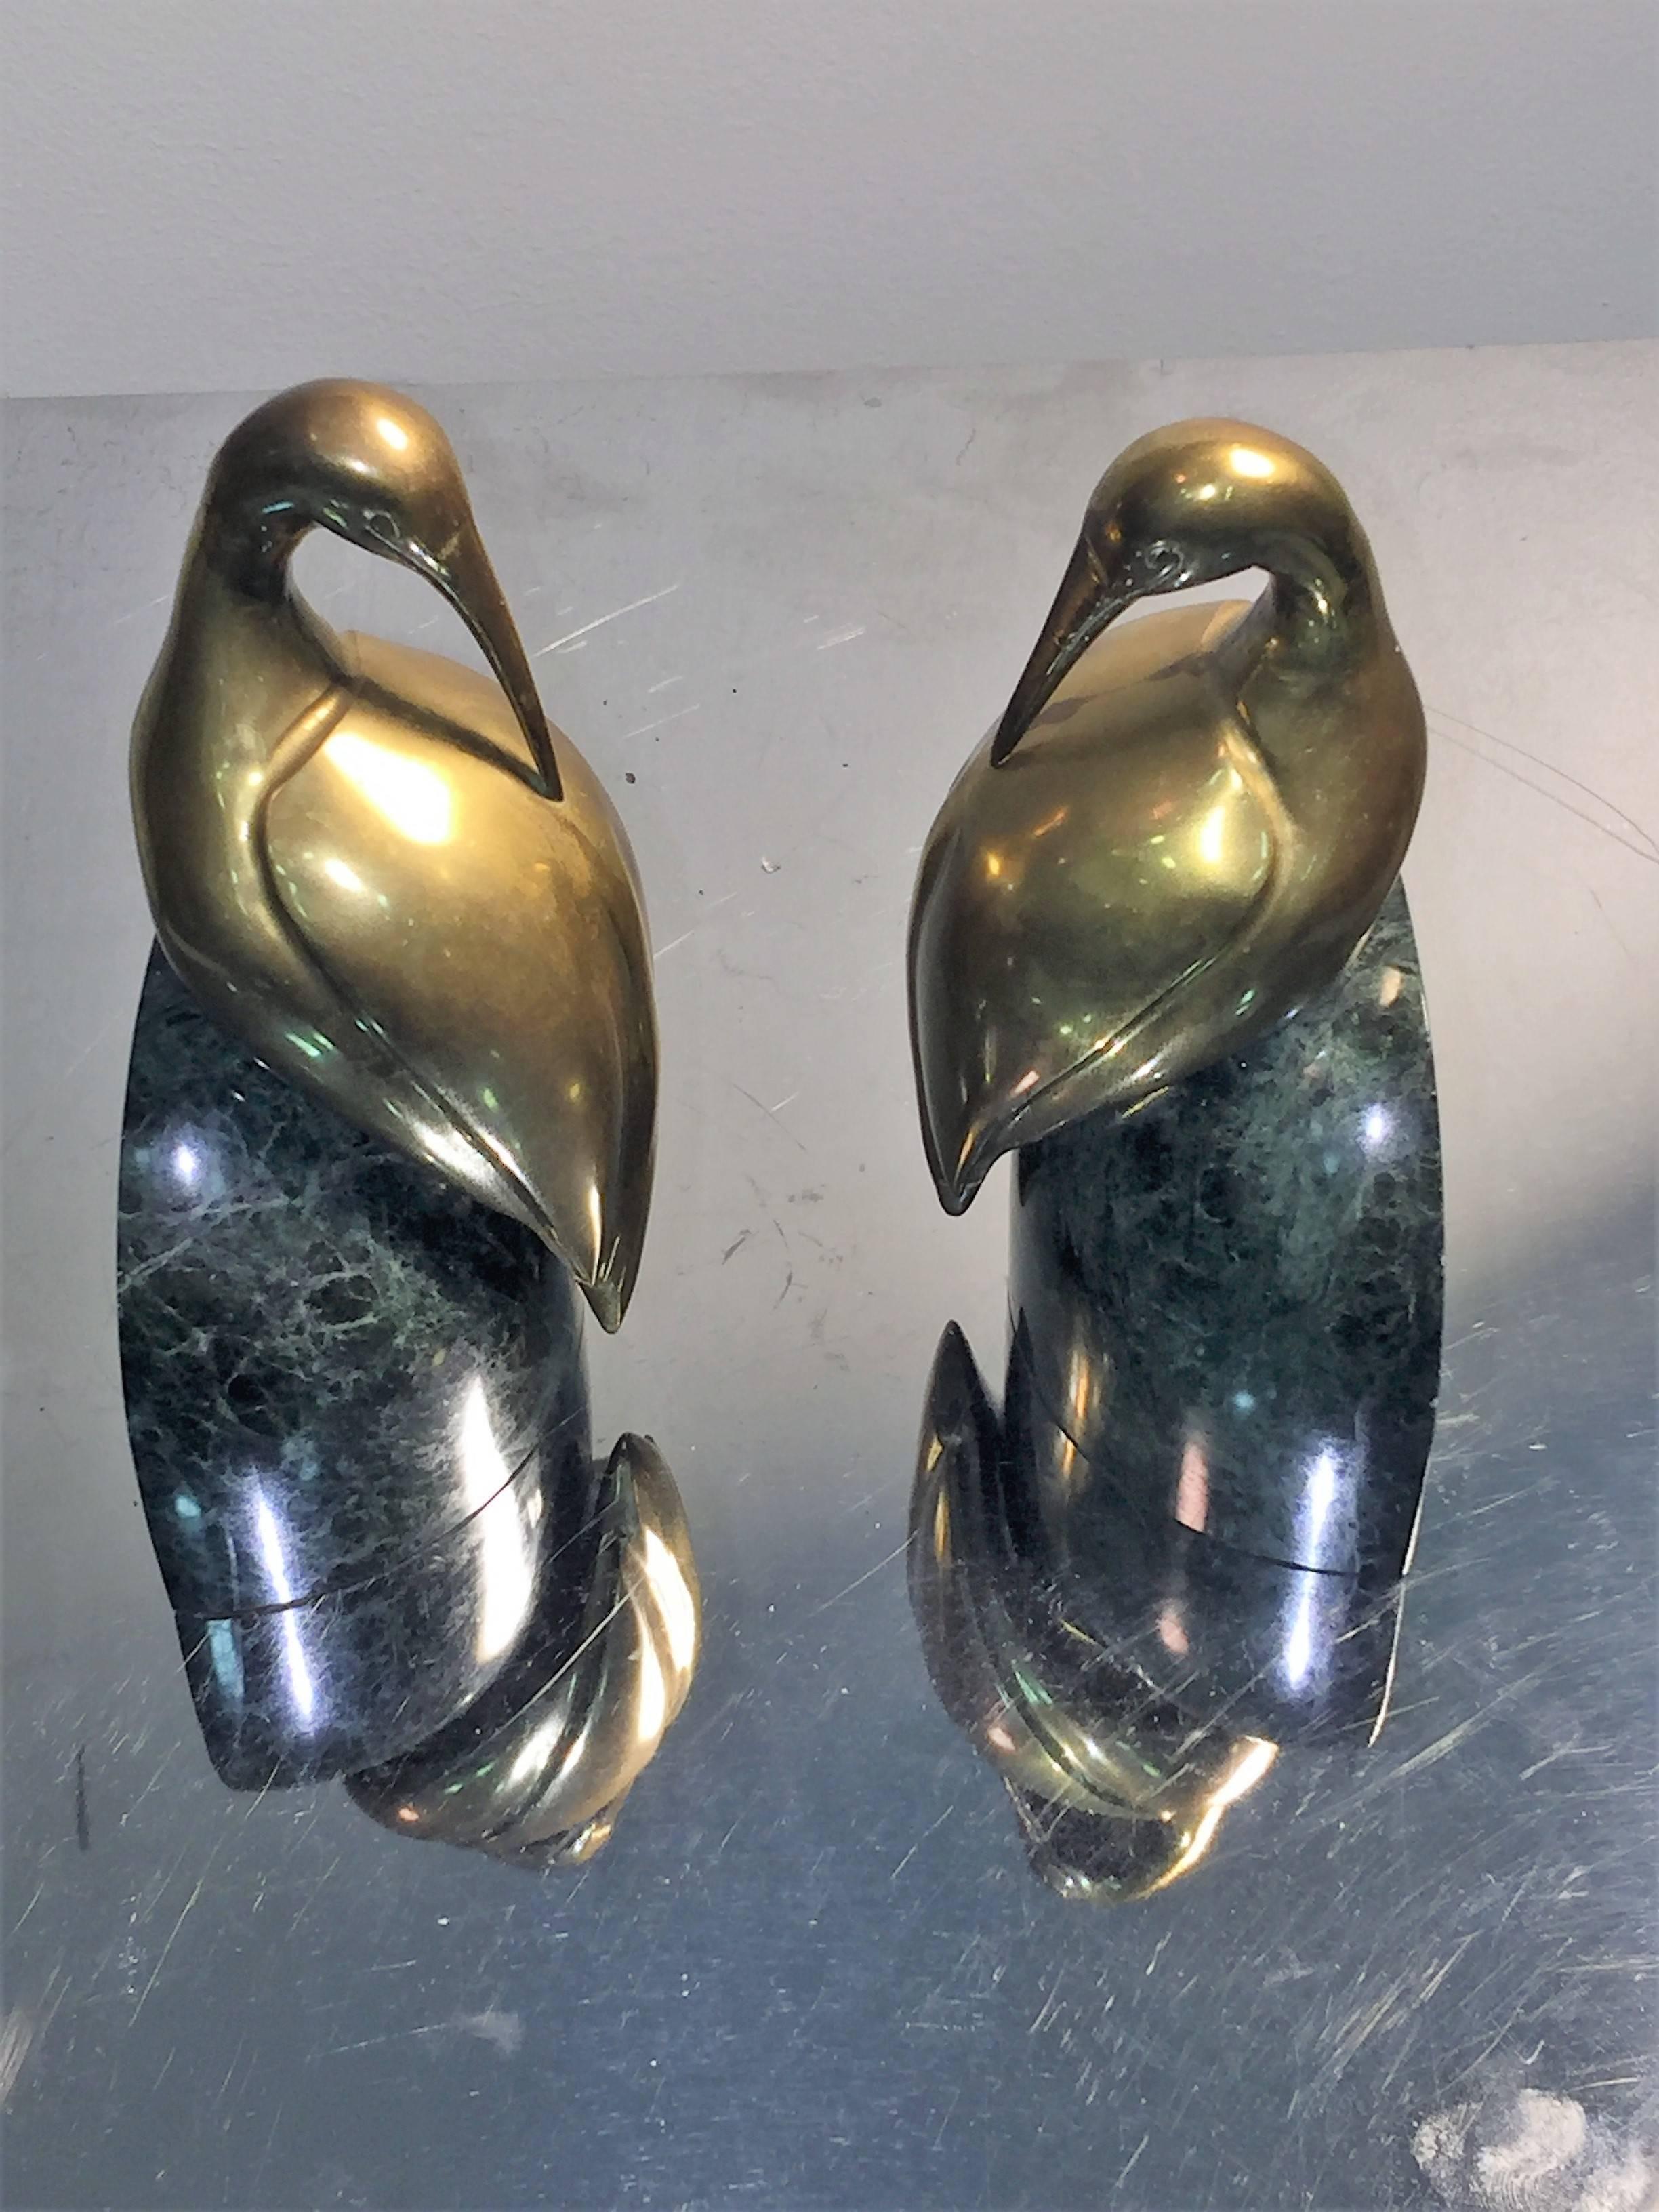 Beautifully done stylized brass egrets mounted on rounded and polished green marble bases. Great Fauna form bookends for your console or coffee table setting.